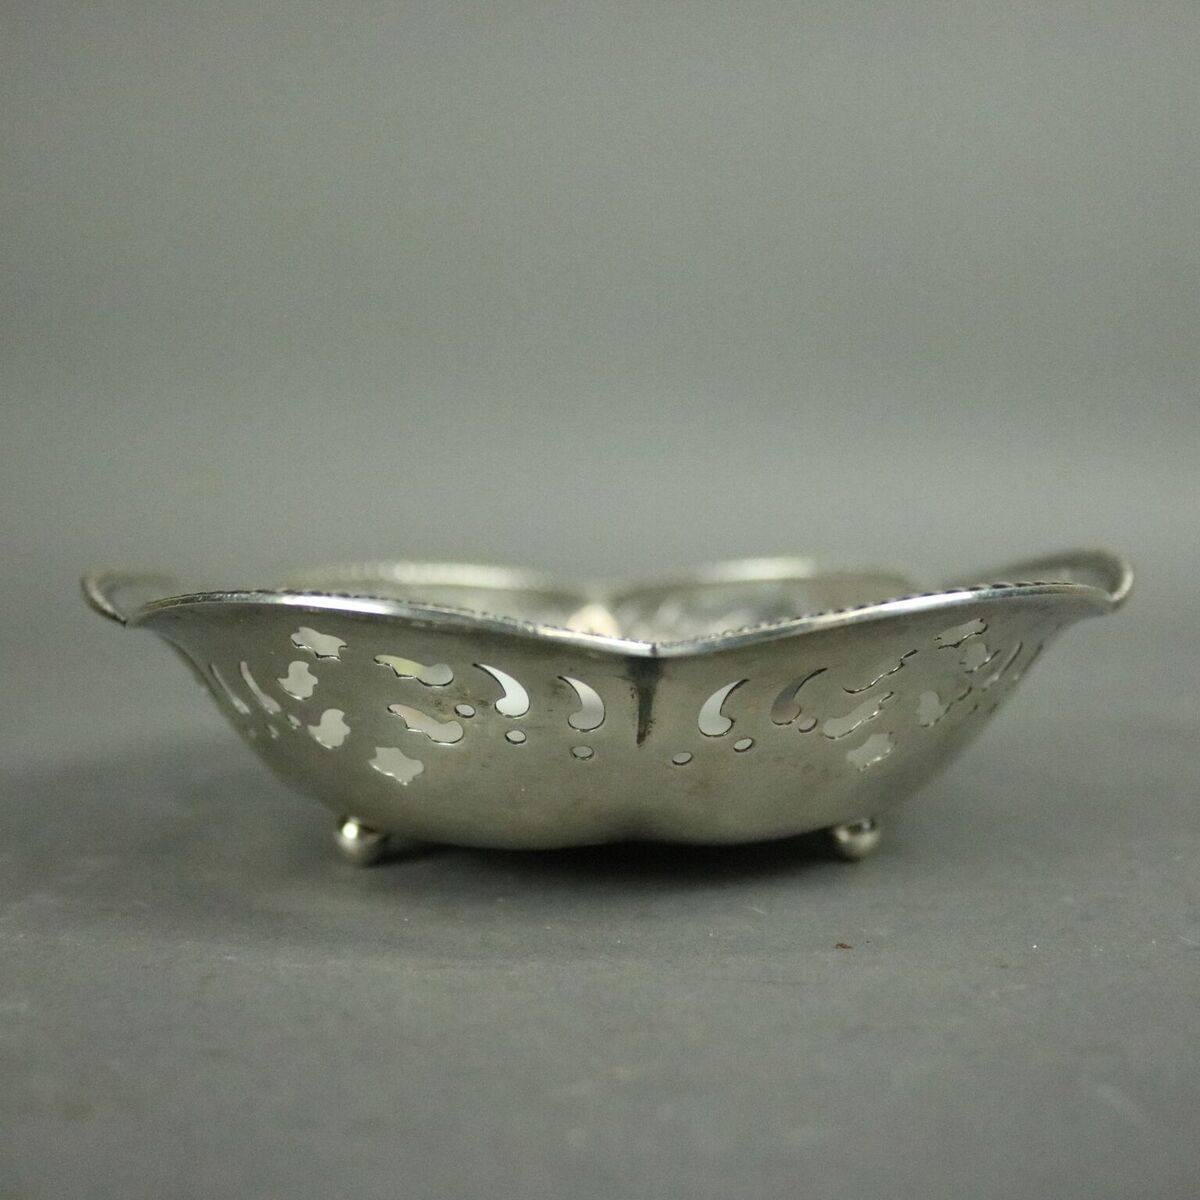 Antique sterling silver candy or ring dish features beaded scalloped edges, six reticulated sides, three ball feet, monogrammed center, Tiffany & Co. makers mark stamped on base, circa 1930

Measures: 1.5" H x 5/75" diameter.